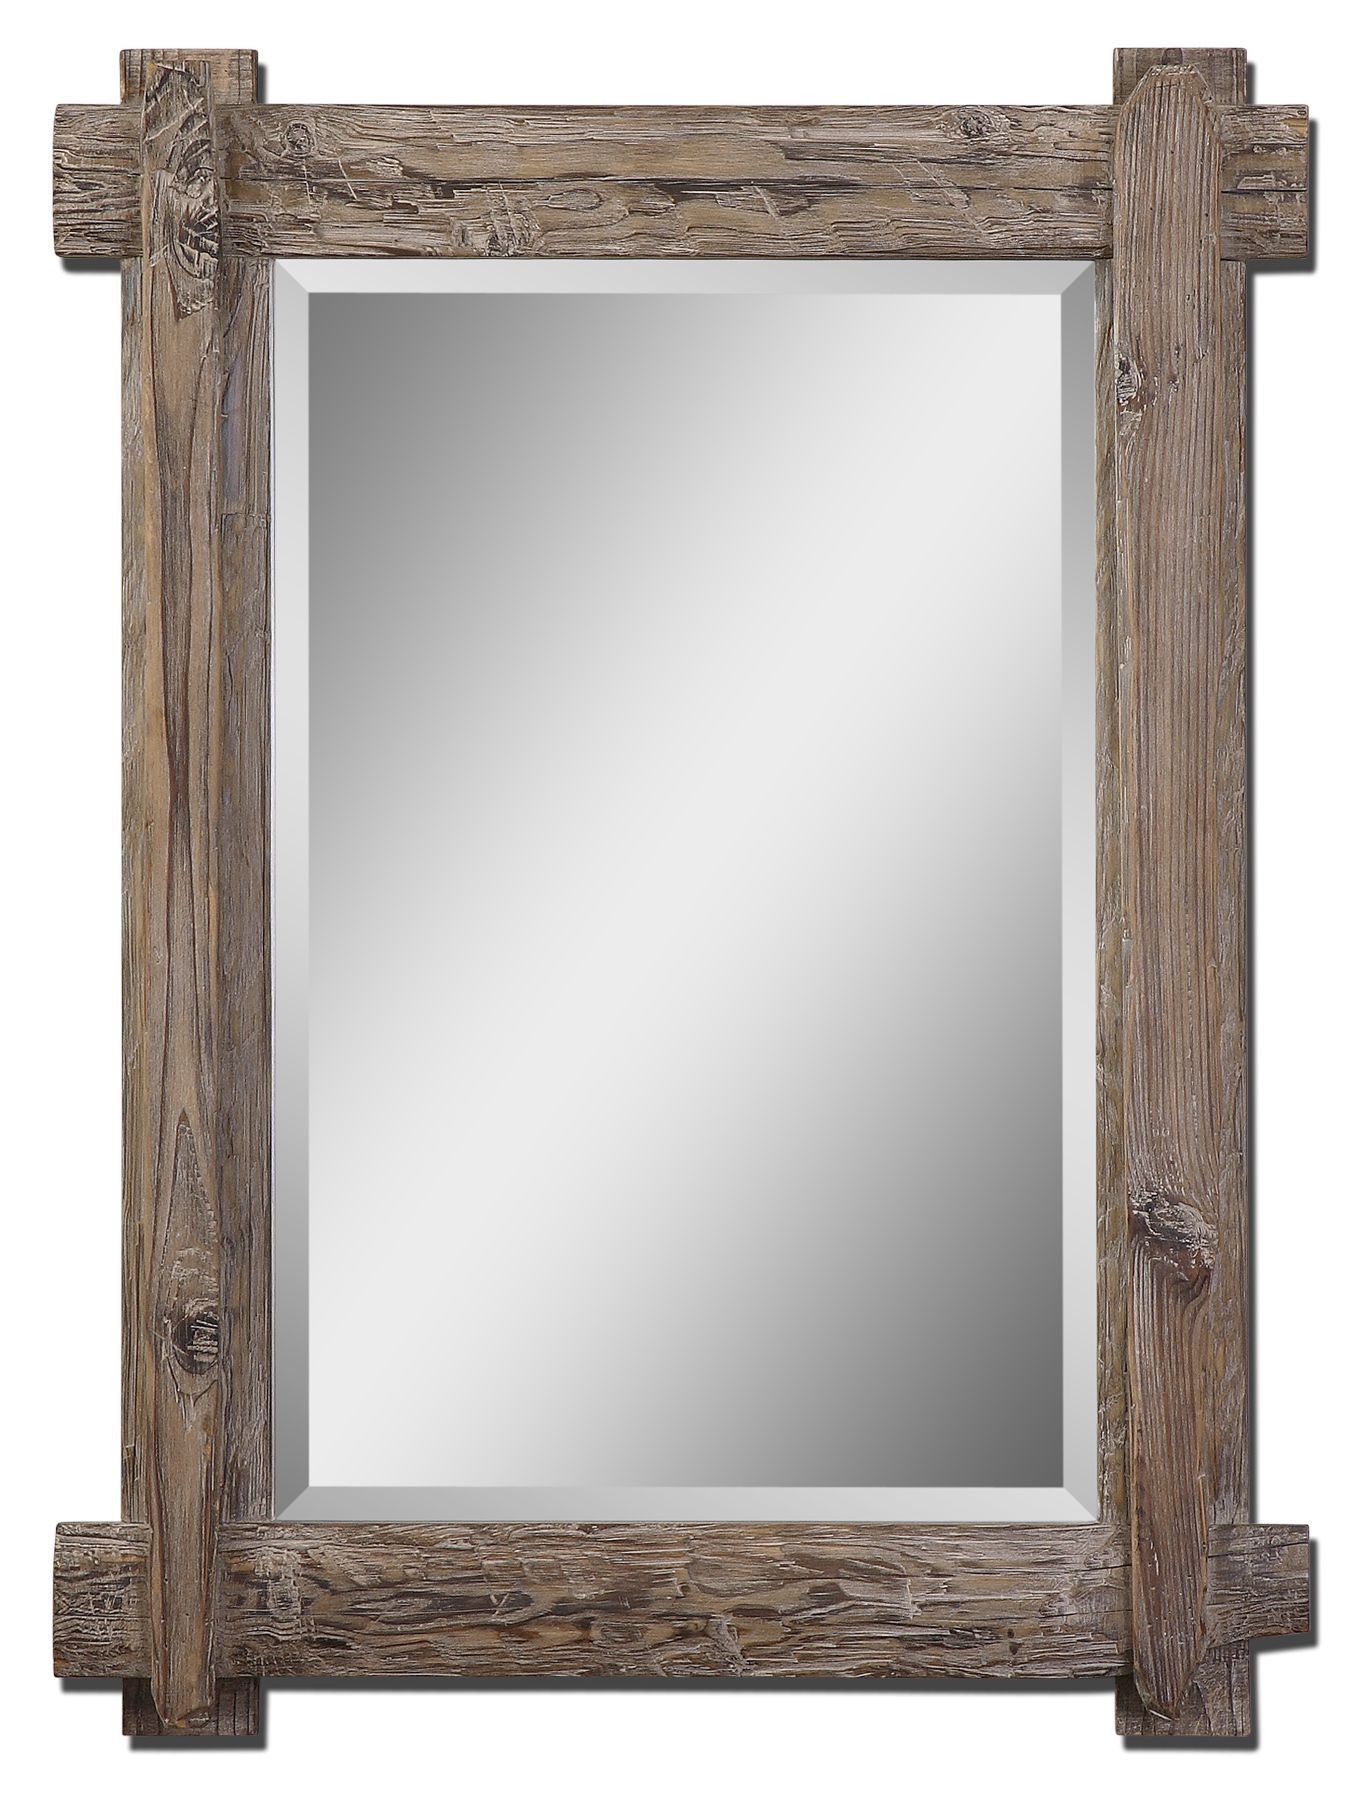 Frame Is Rustic, Light Walnut Stained Wood With Burnished Details Pertaining To Rustic Getaway Wood Wall Mirrors (View 5 of 15)